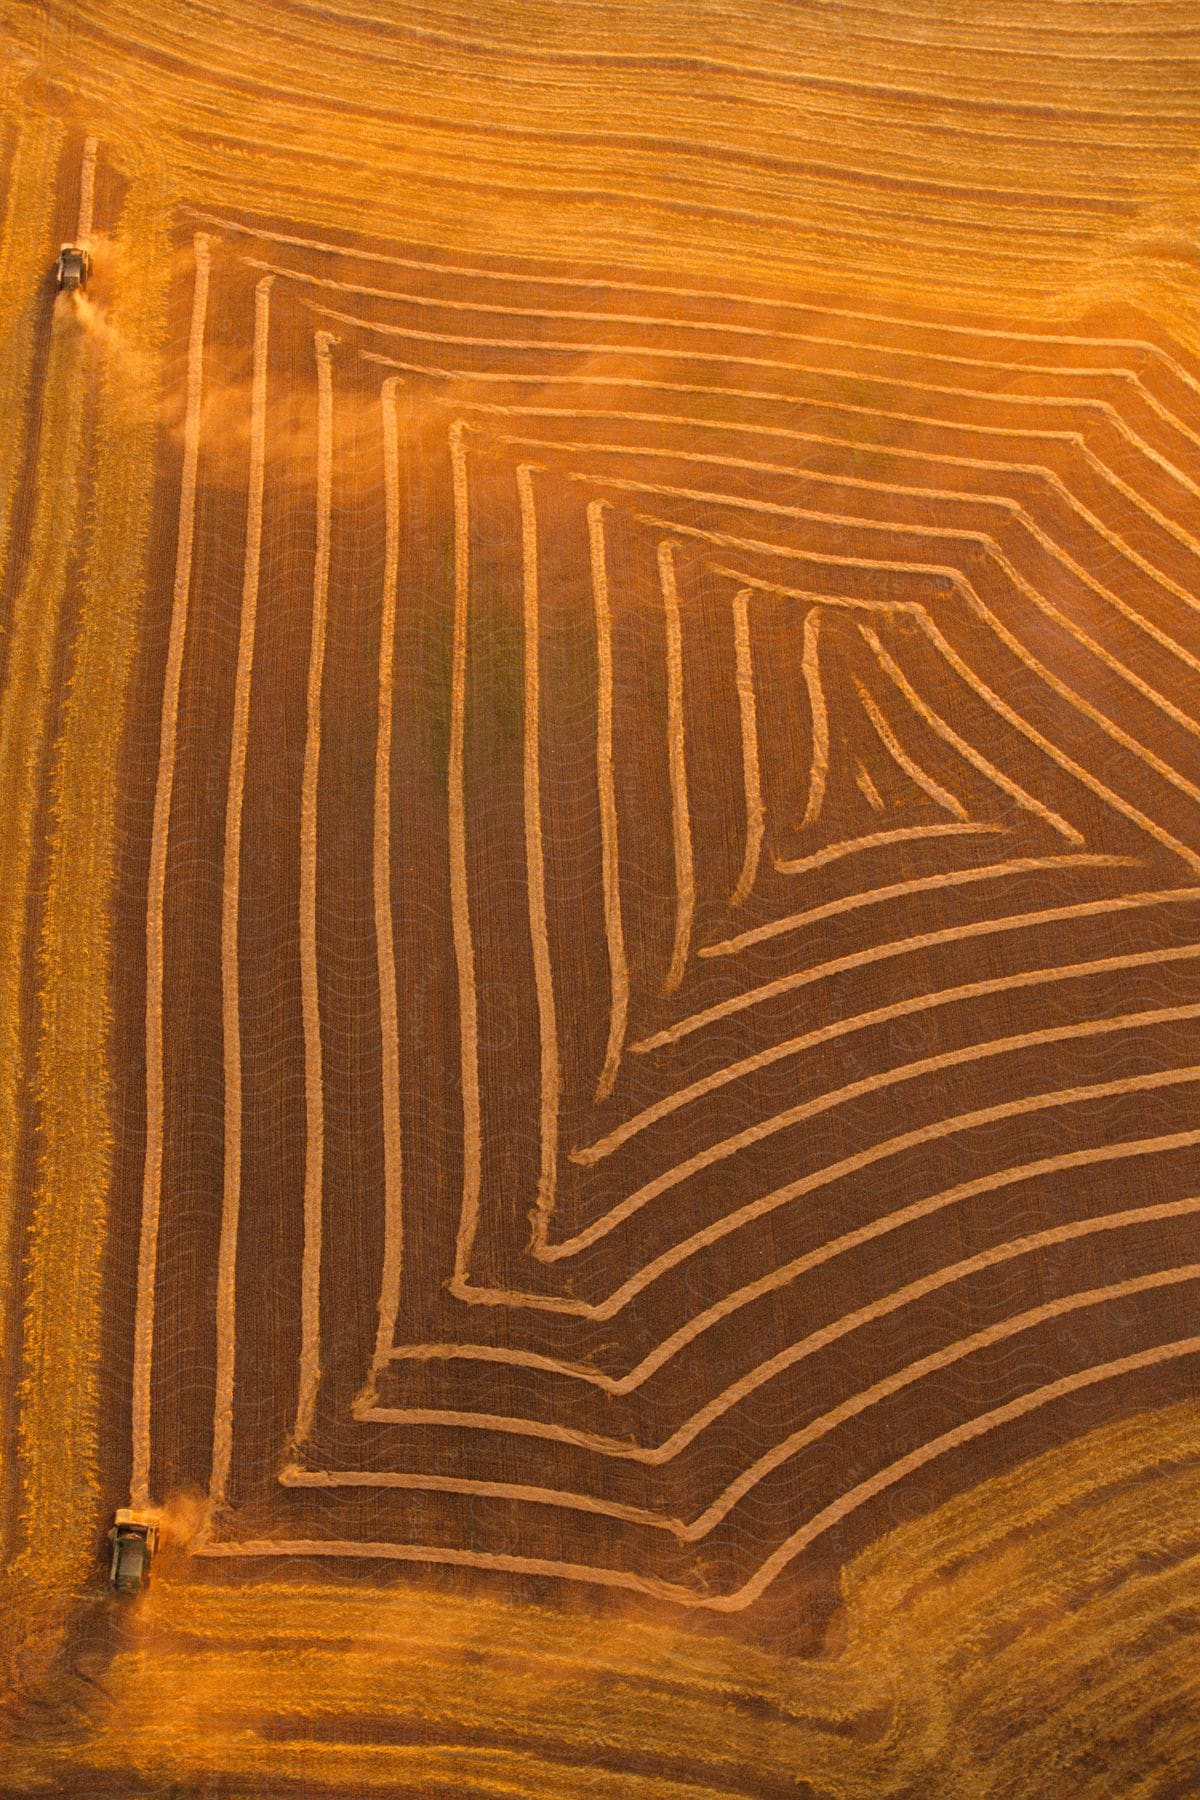 Two tractors harvesting crops creating peculiar shapes in the ground